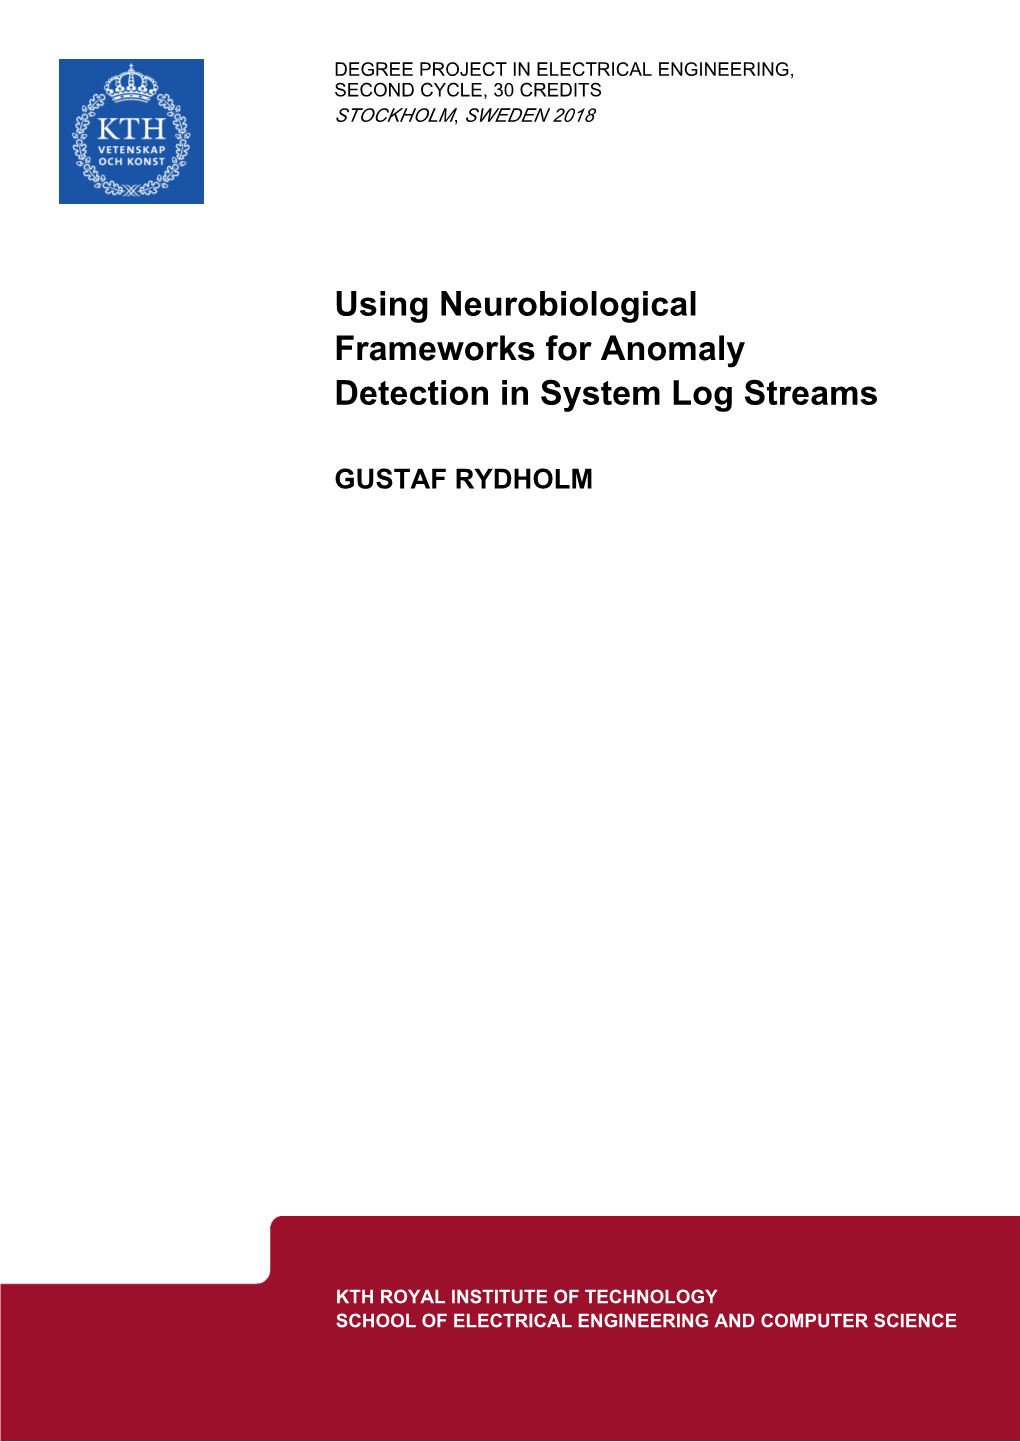 Using Neurobiological Frameworks for Anomaly Detection in System Log Streams